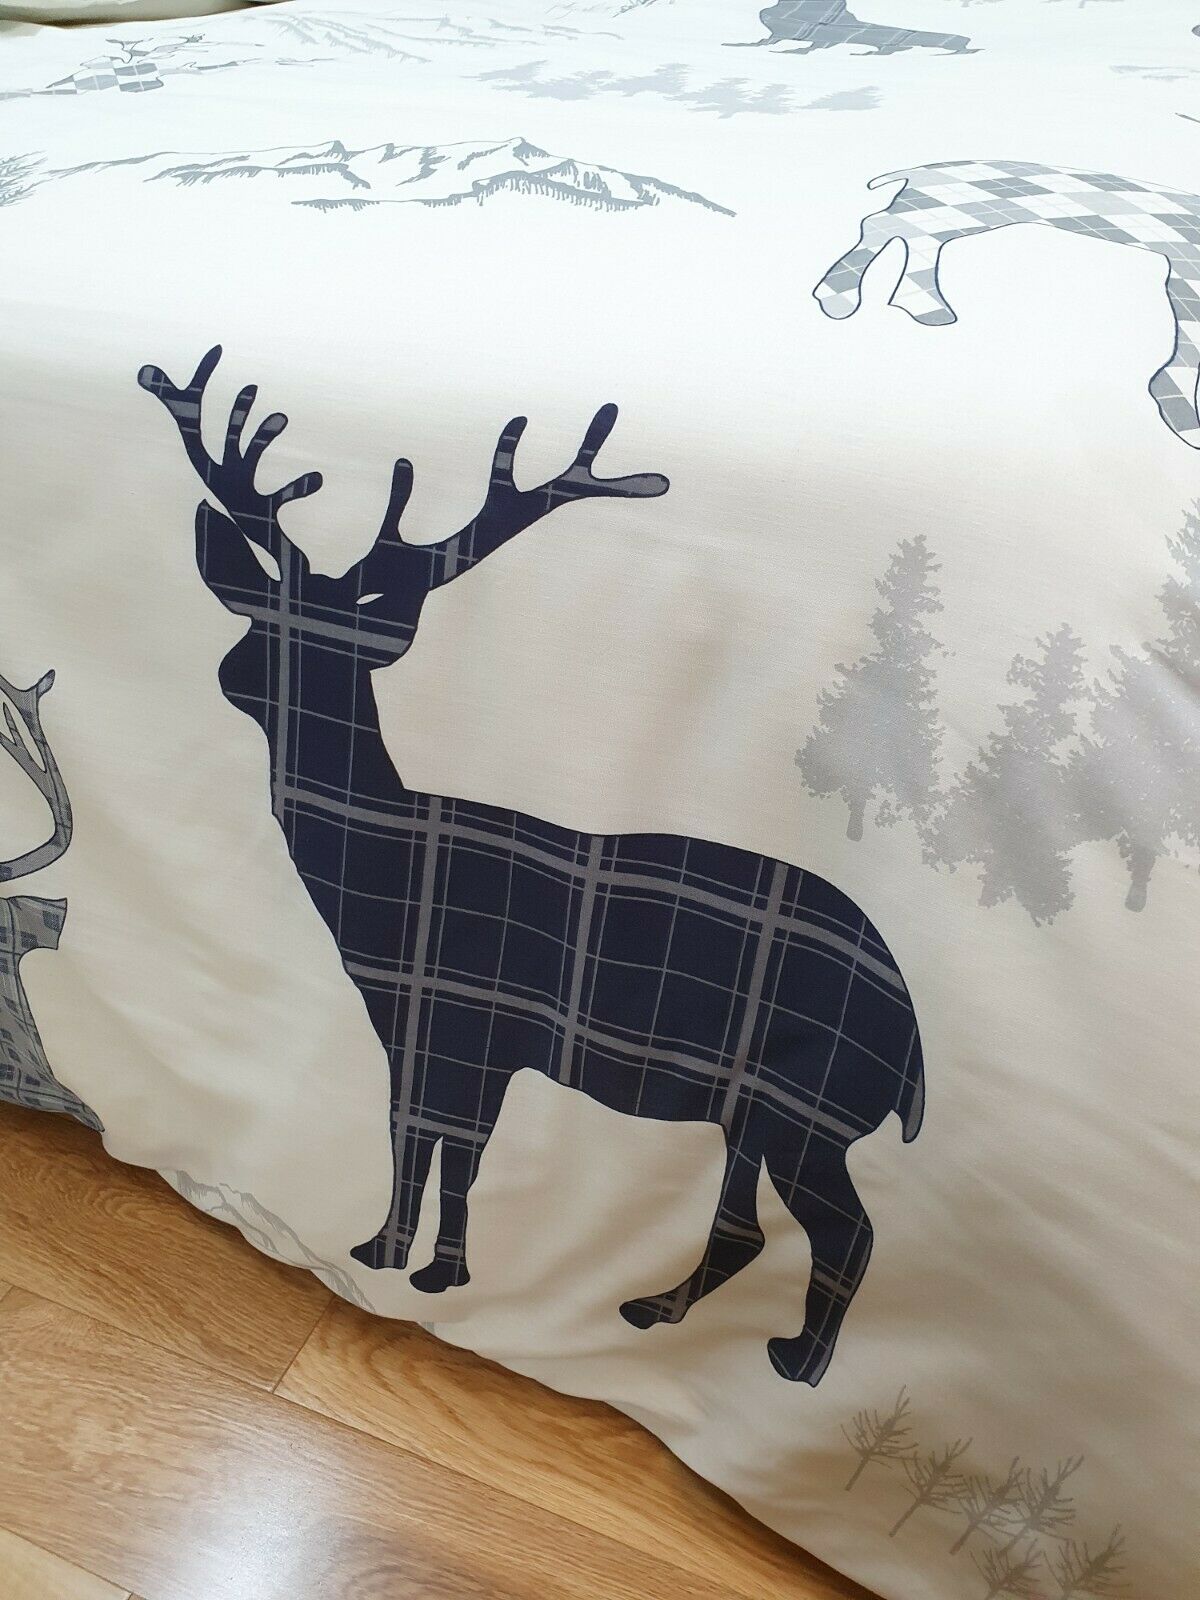 Super King Size Highland Stag Duvet Cover Set Reversible Navy Cream Grey Mountains